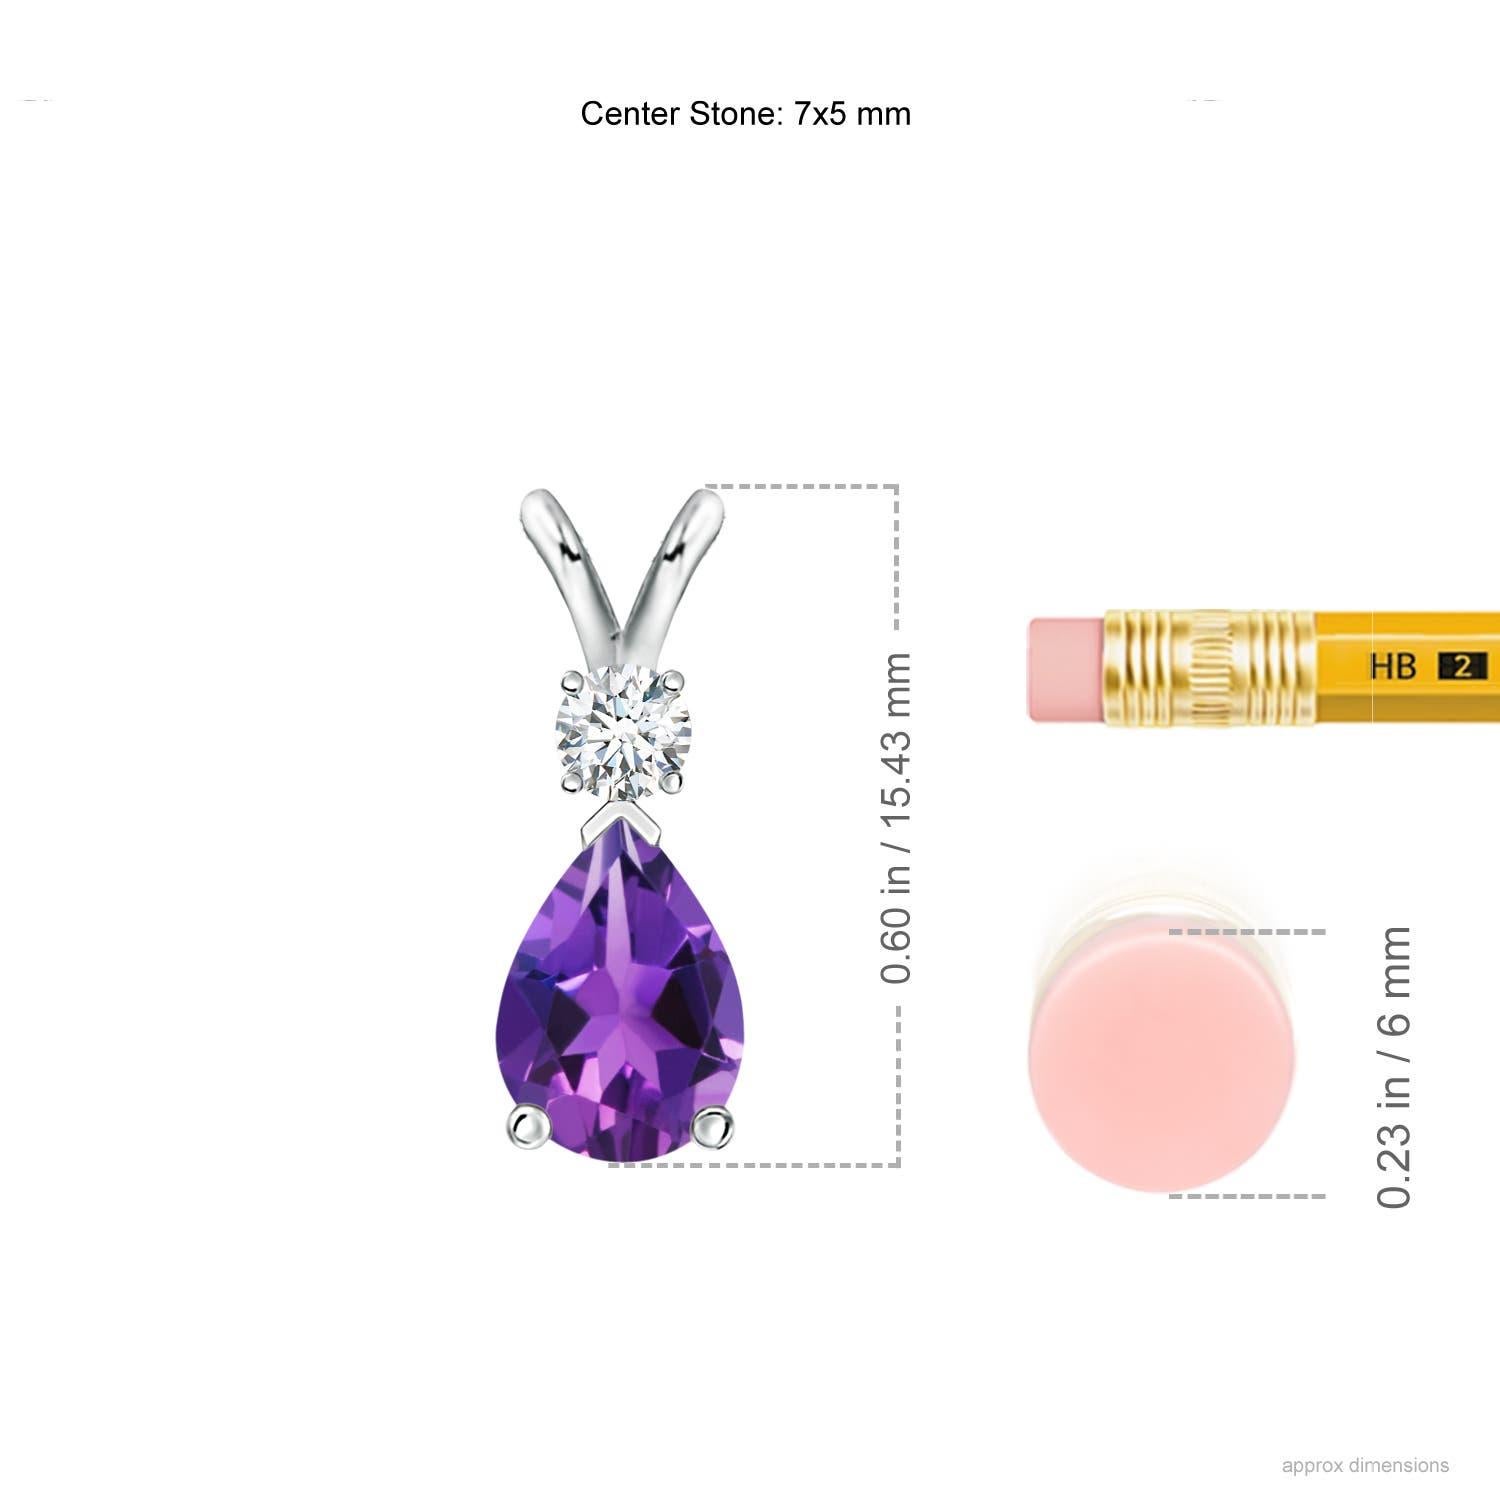 A pear-shaped deep purple amethyst is secured in a prong setting and embellished with a diamond accent on the top. Simple yet stunning, this teardrop amethyst pendant with V bale is sculpted in 14k white gold.